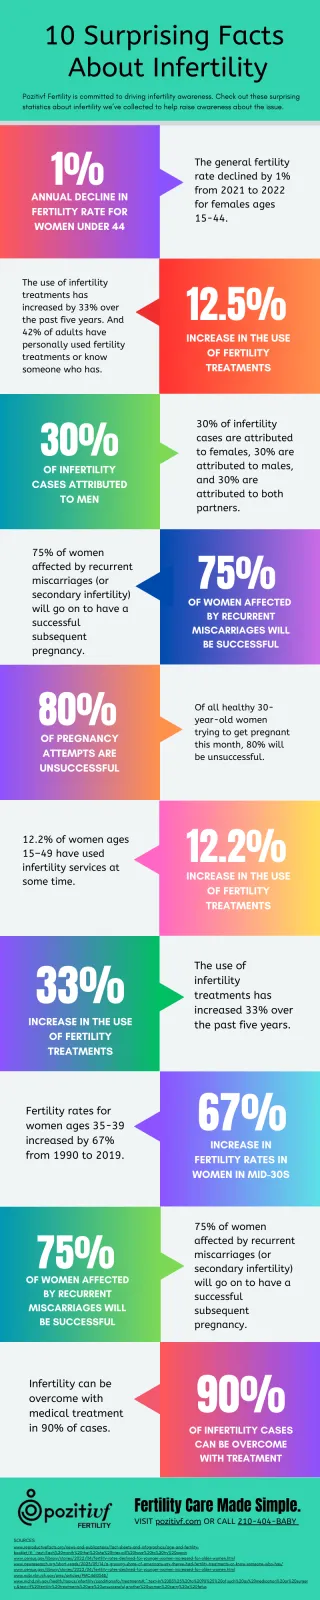 10 Surprising Facts About Infertility